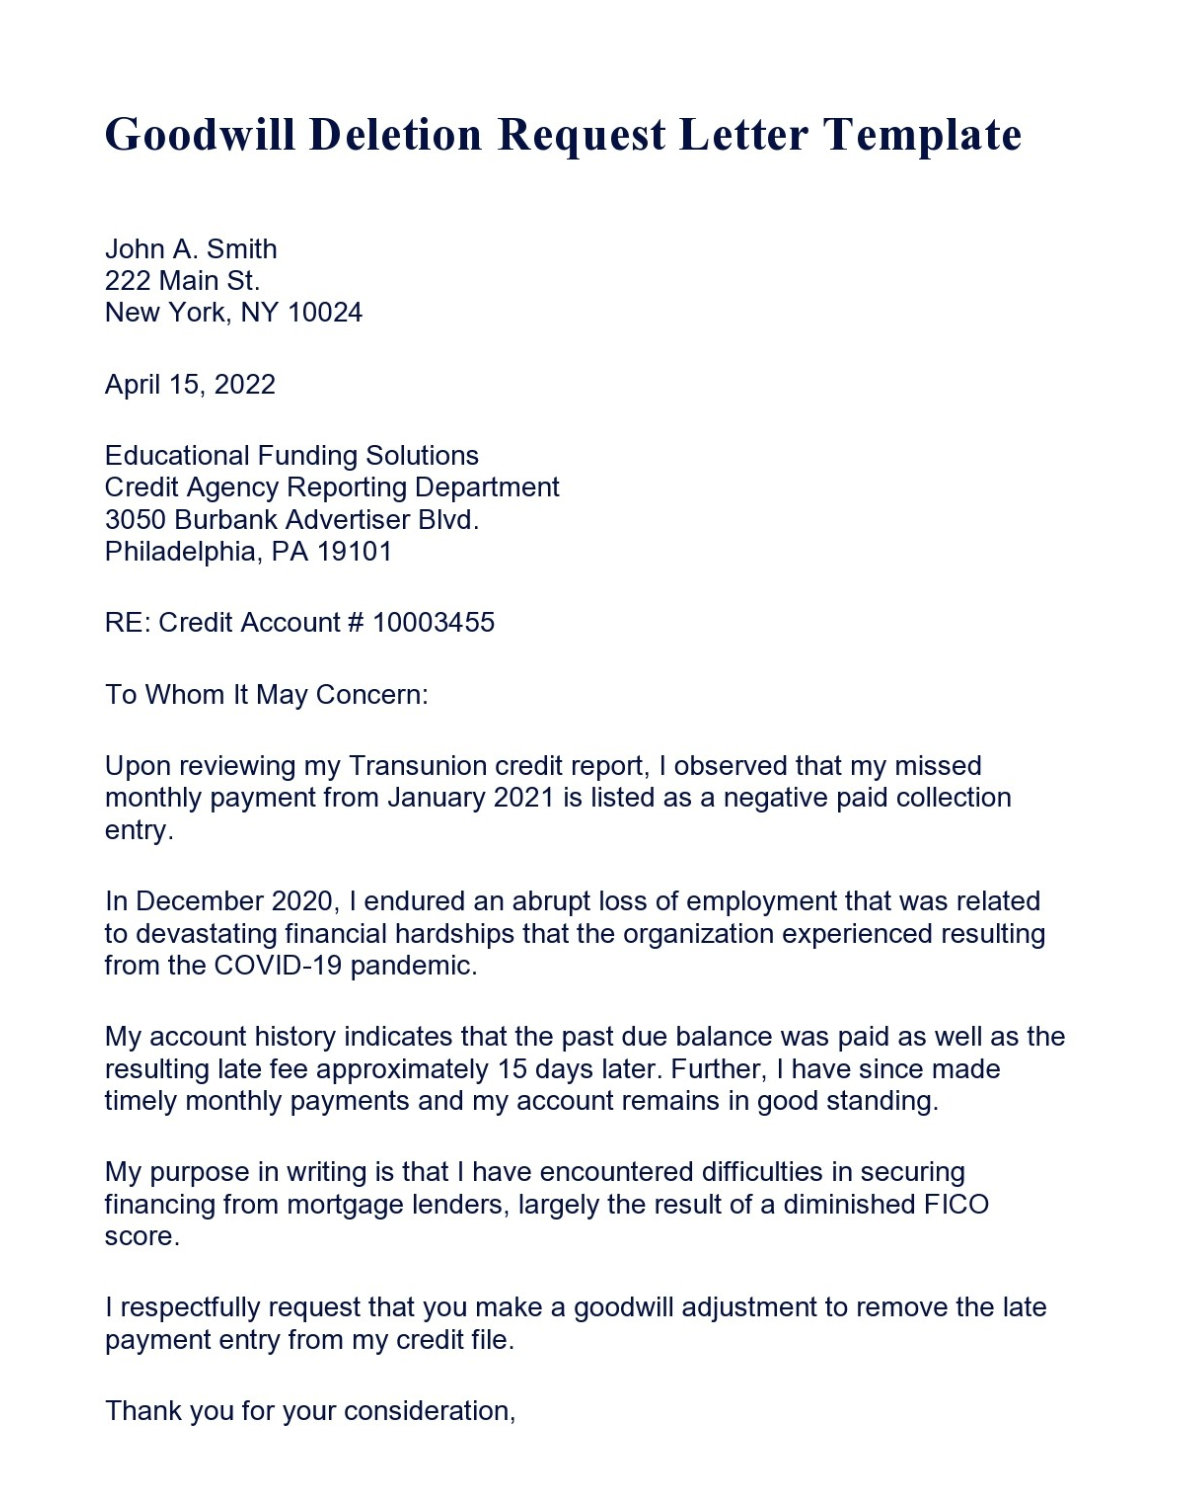 goodwill deletion request letter